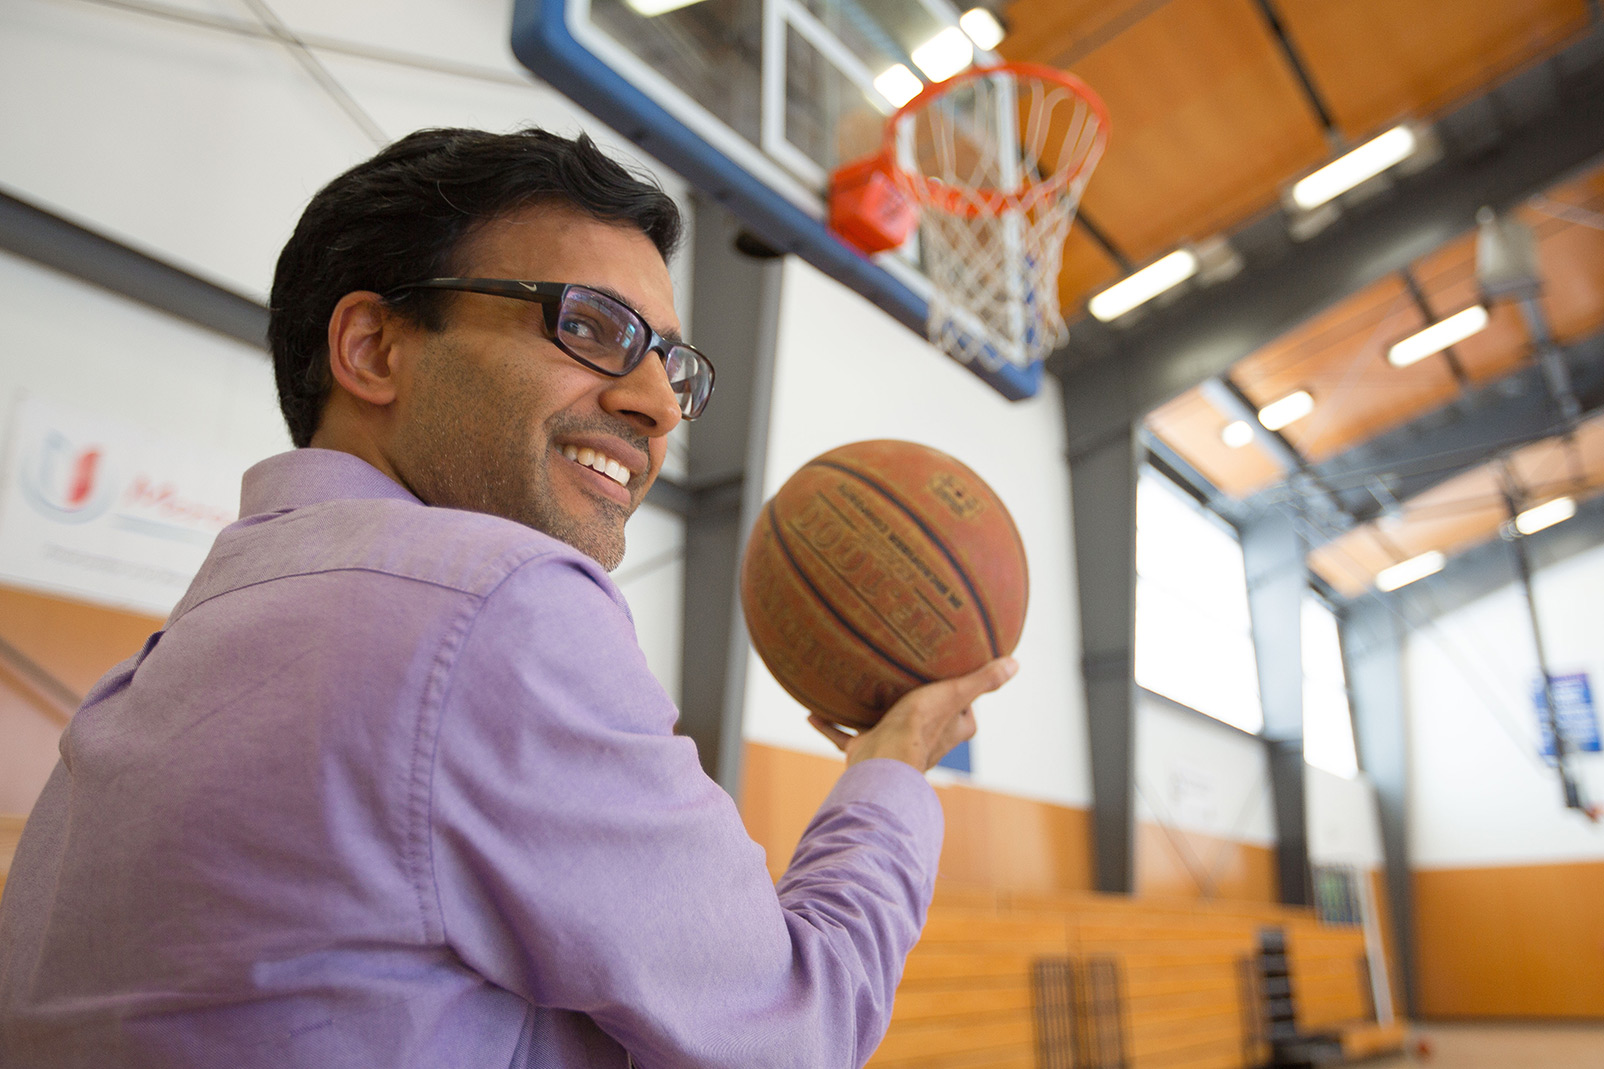 Professor Harish Bhat won't say his NBA predictions are a slam dunk, but they are pretty accurate.